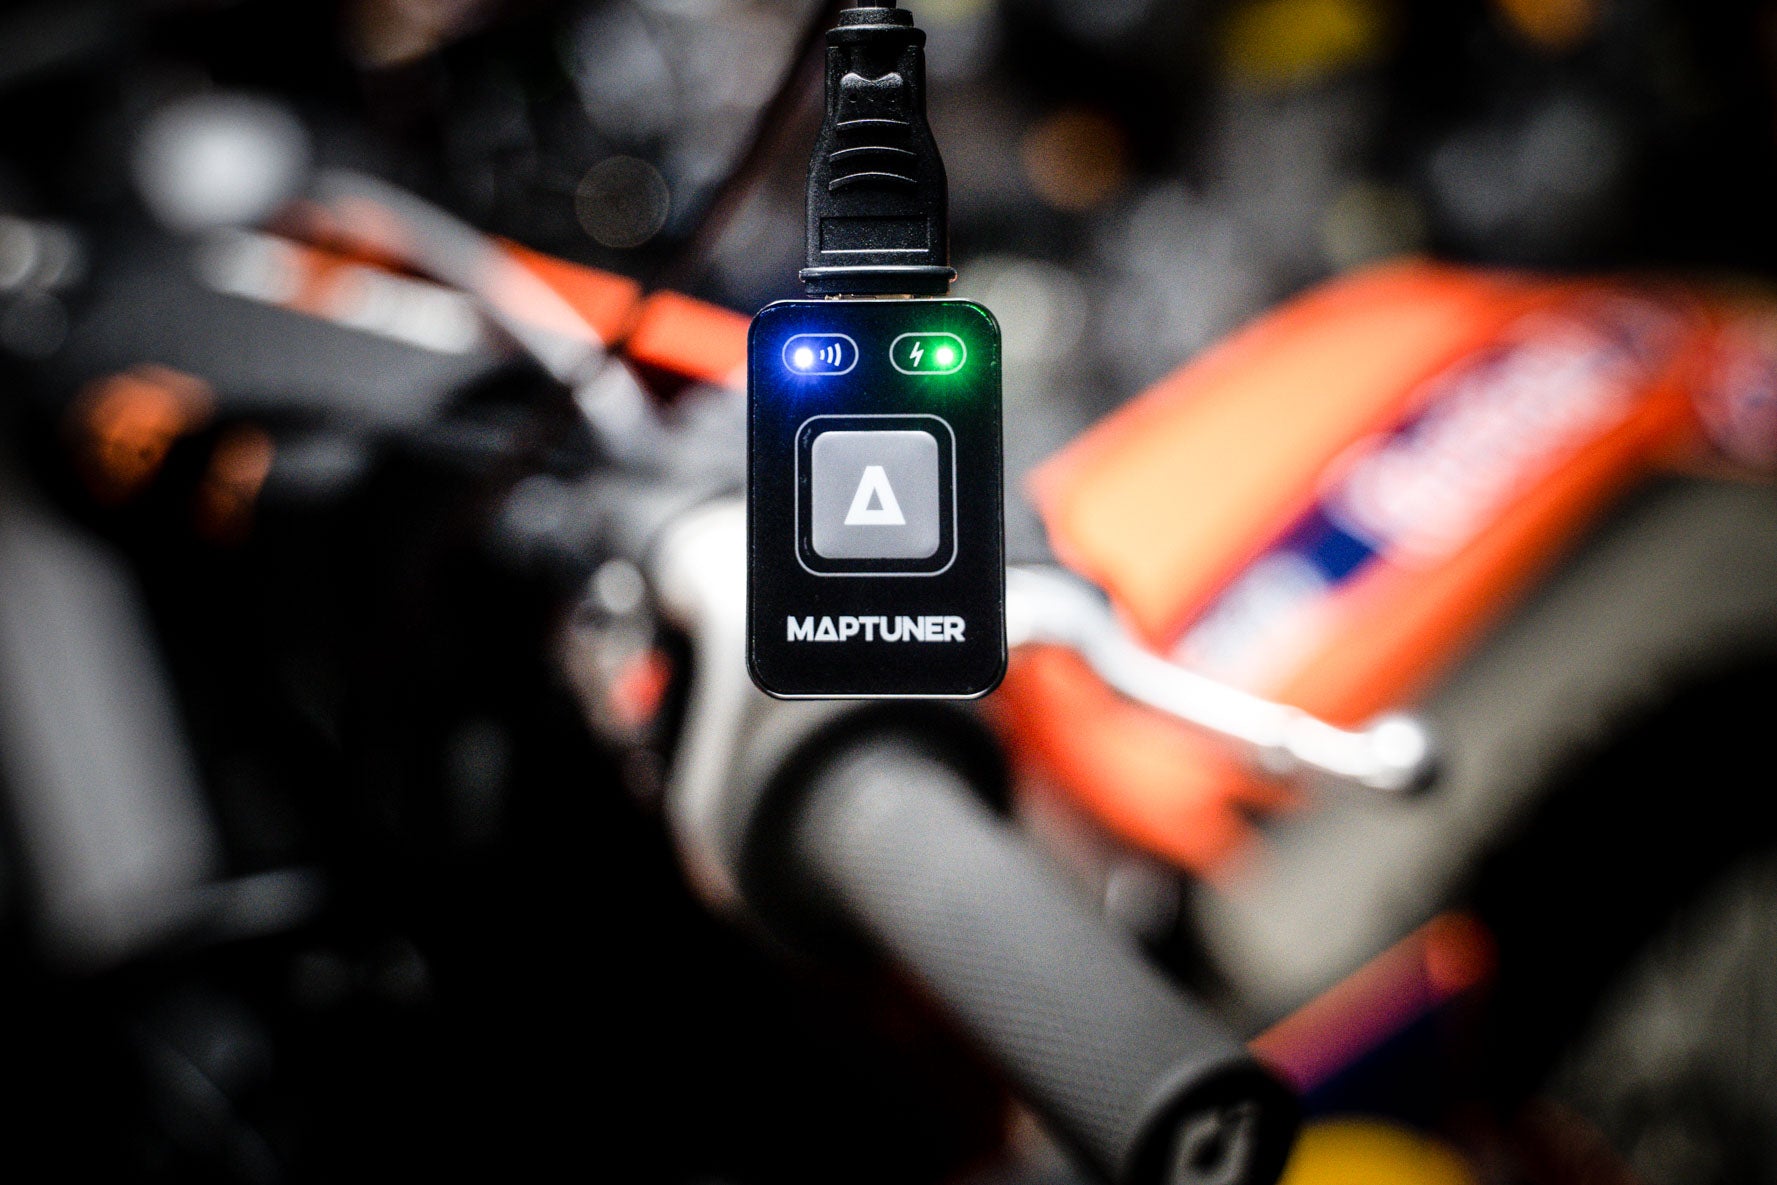 Maptuner Nano in front of KTM Dirt bike plugged into HDMI